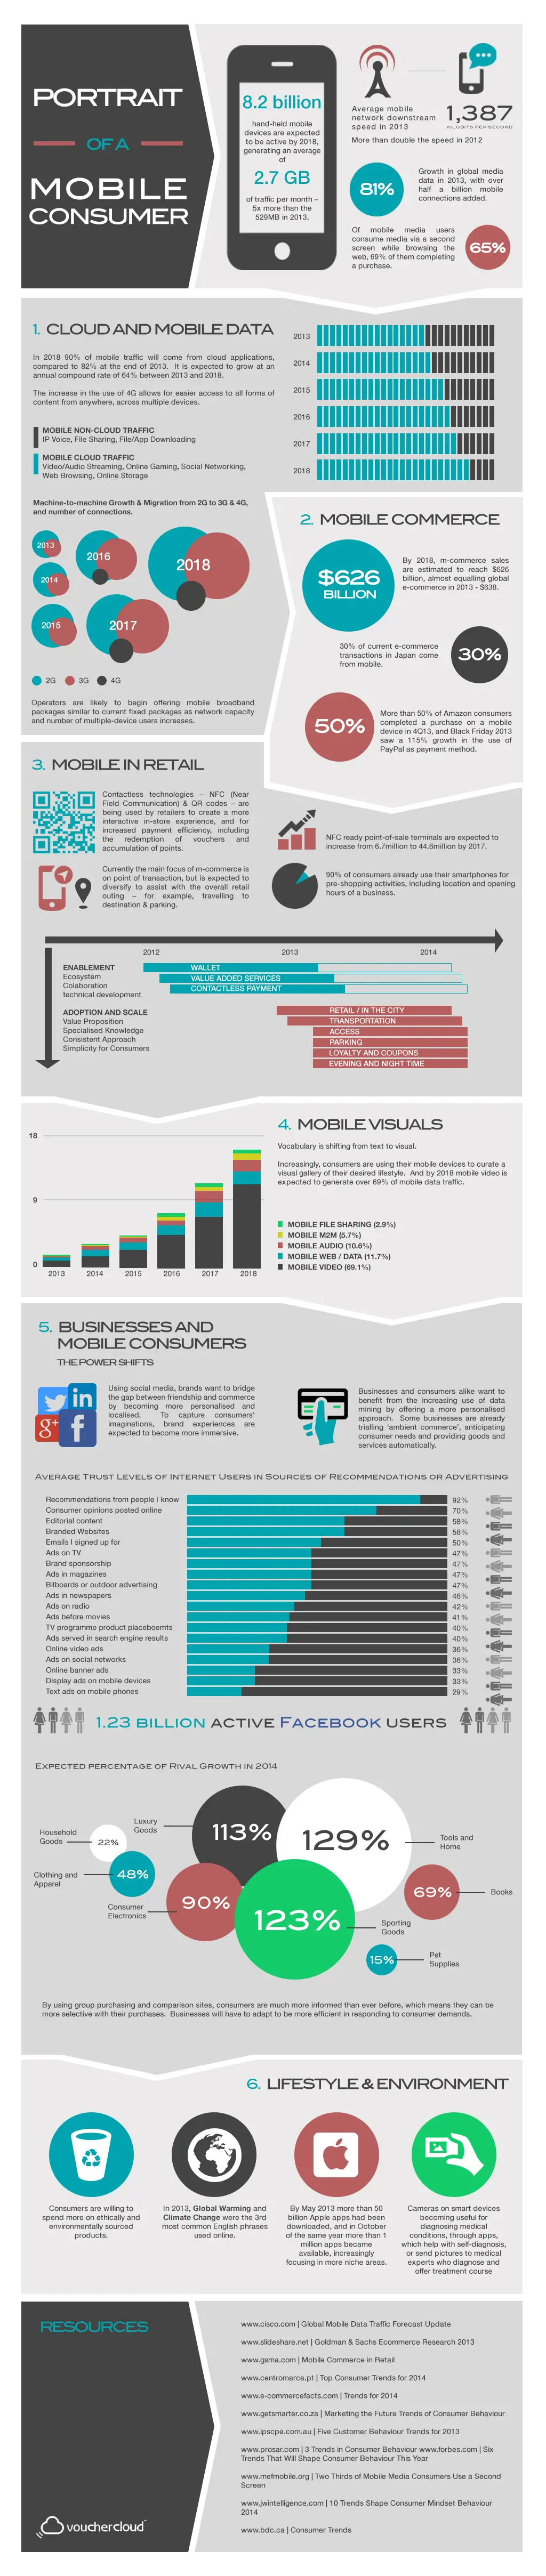 wersm-portrait of a mobile consumer infographic